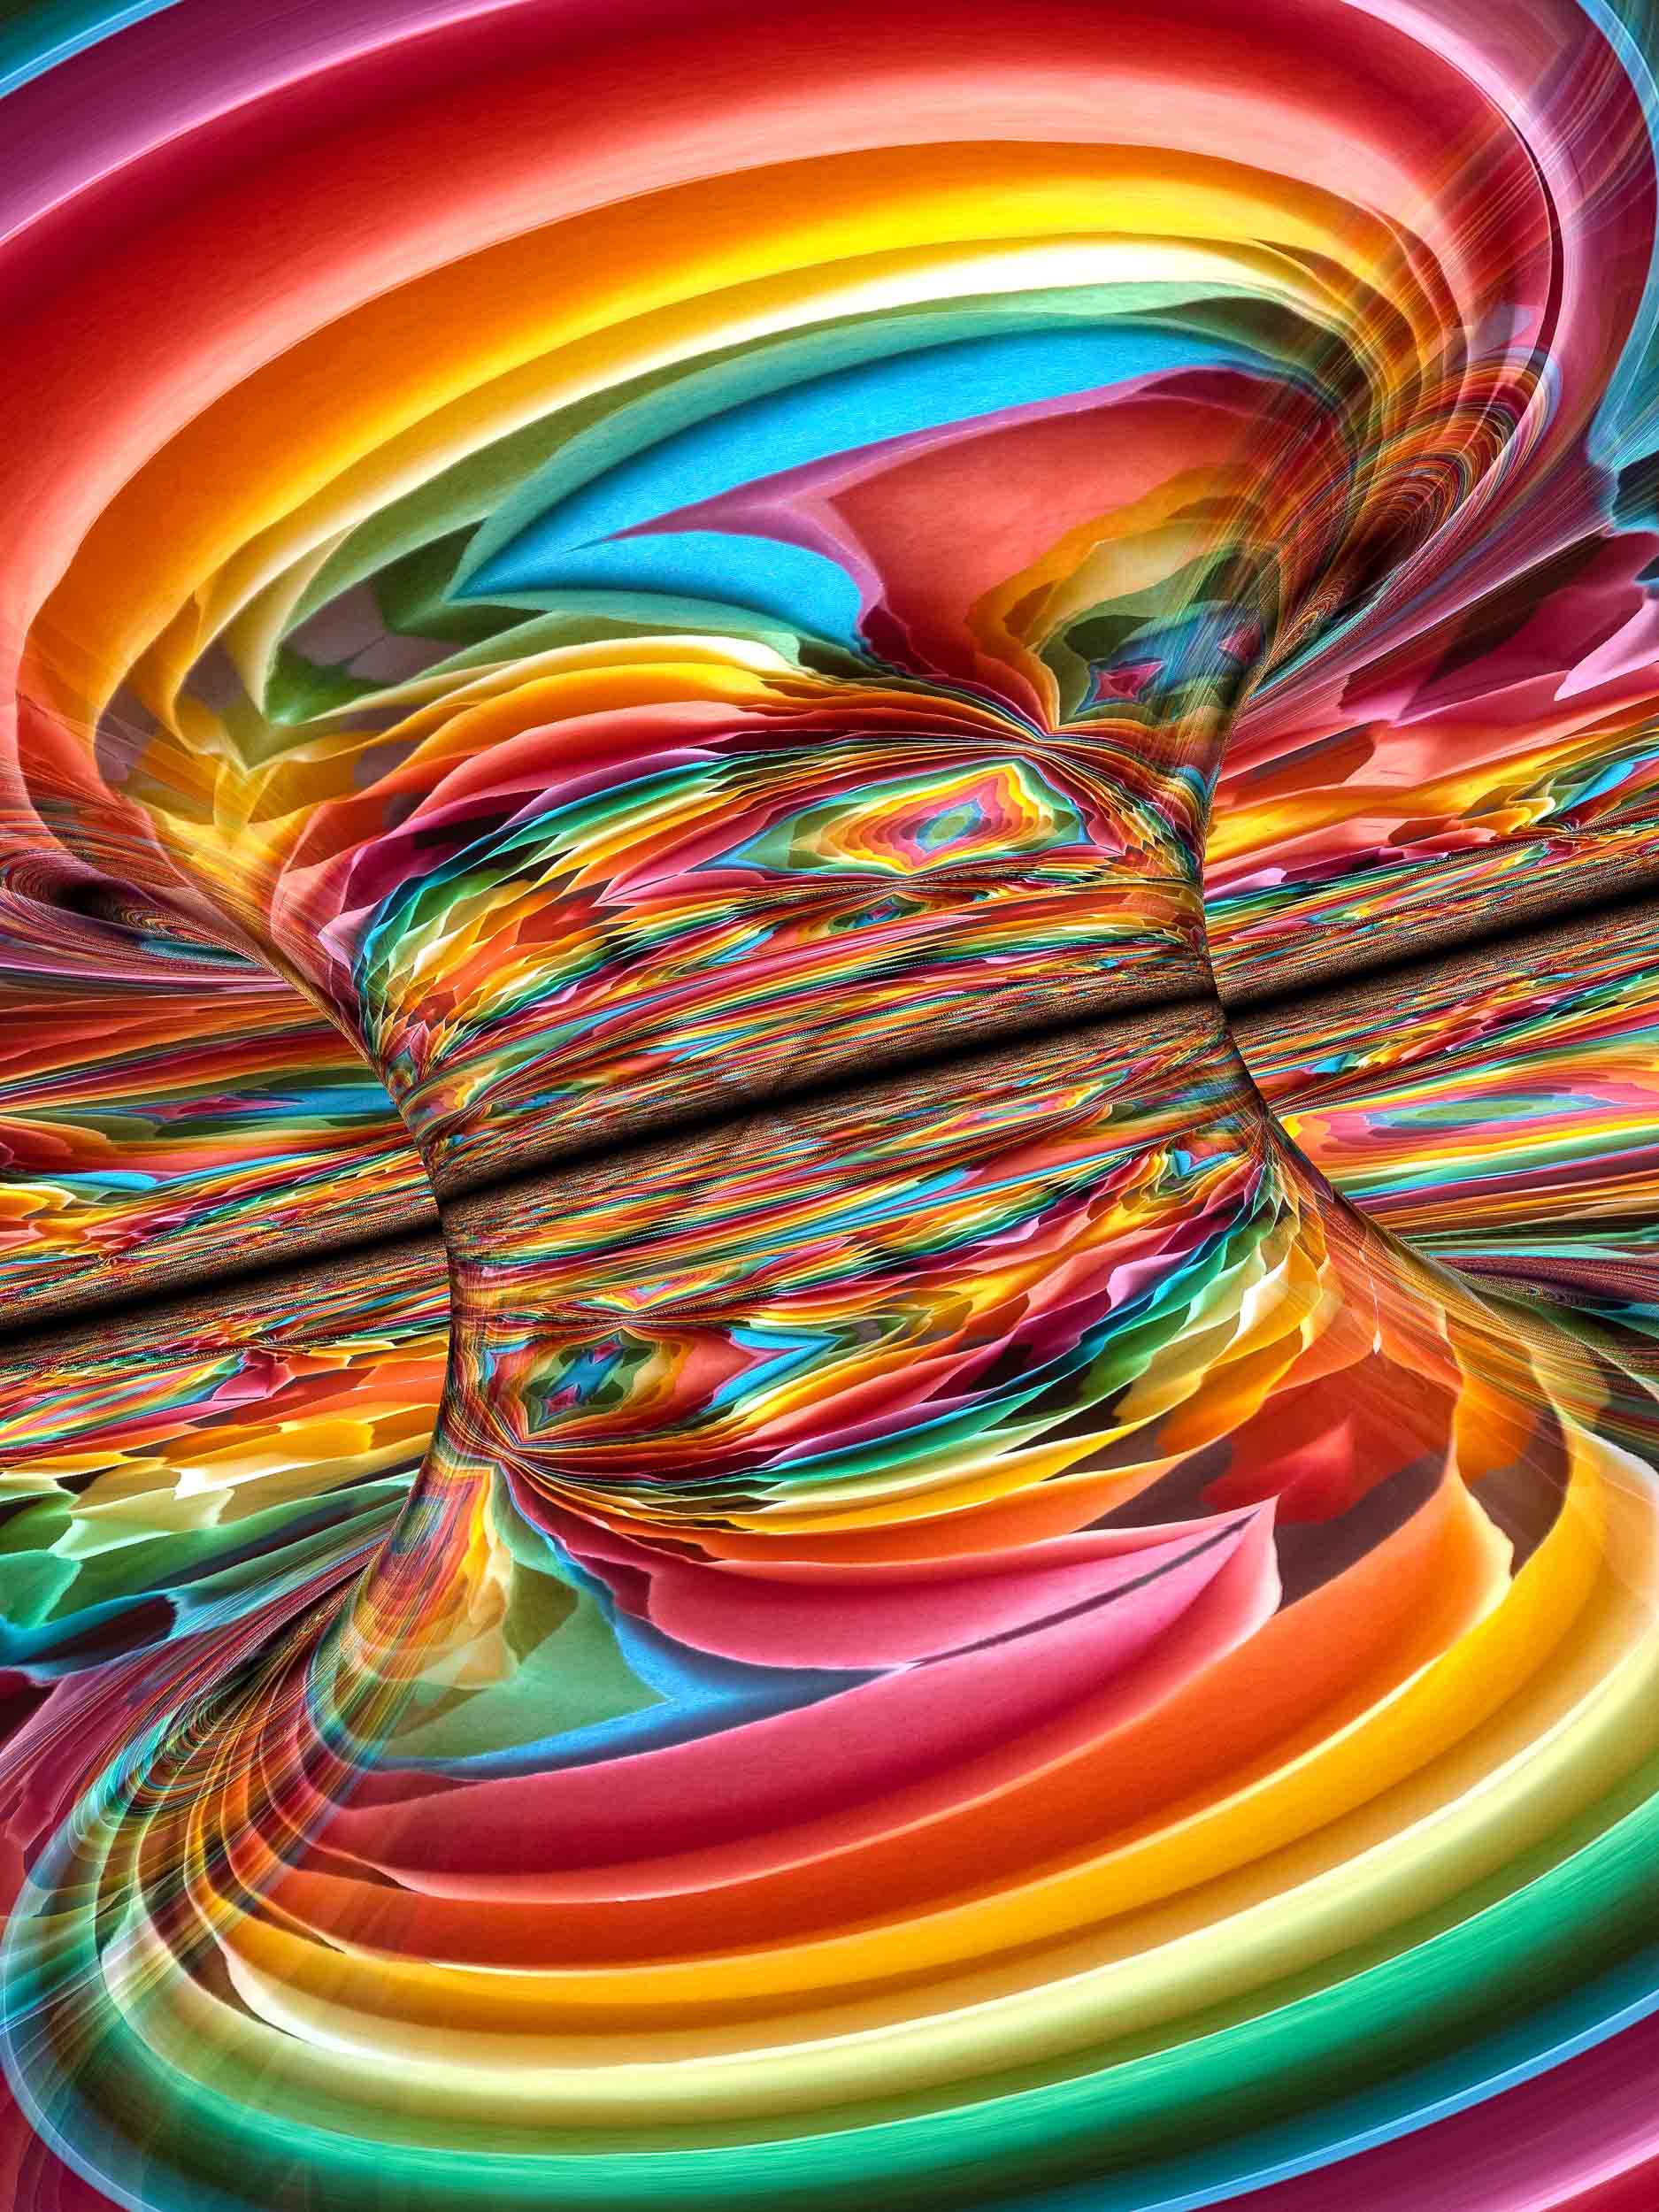 Colourful abstract digital image of a swirling funnel